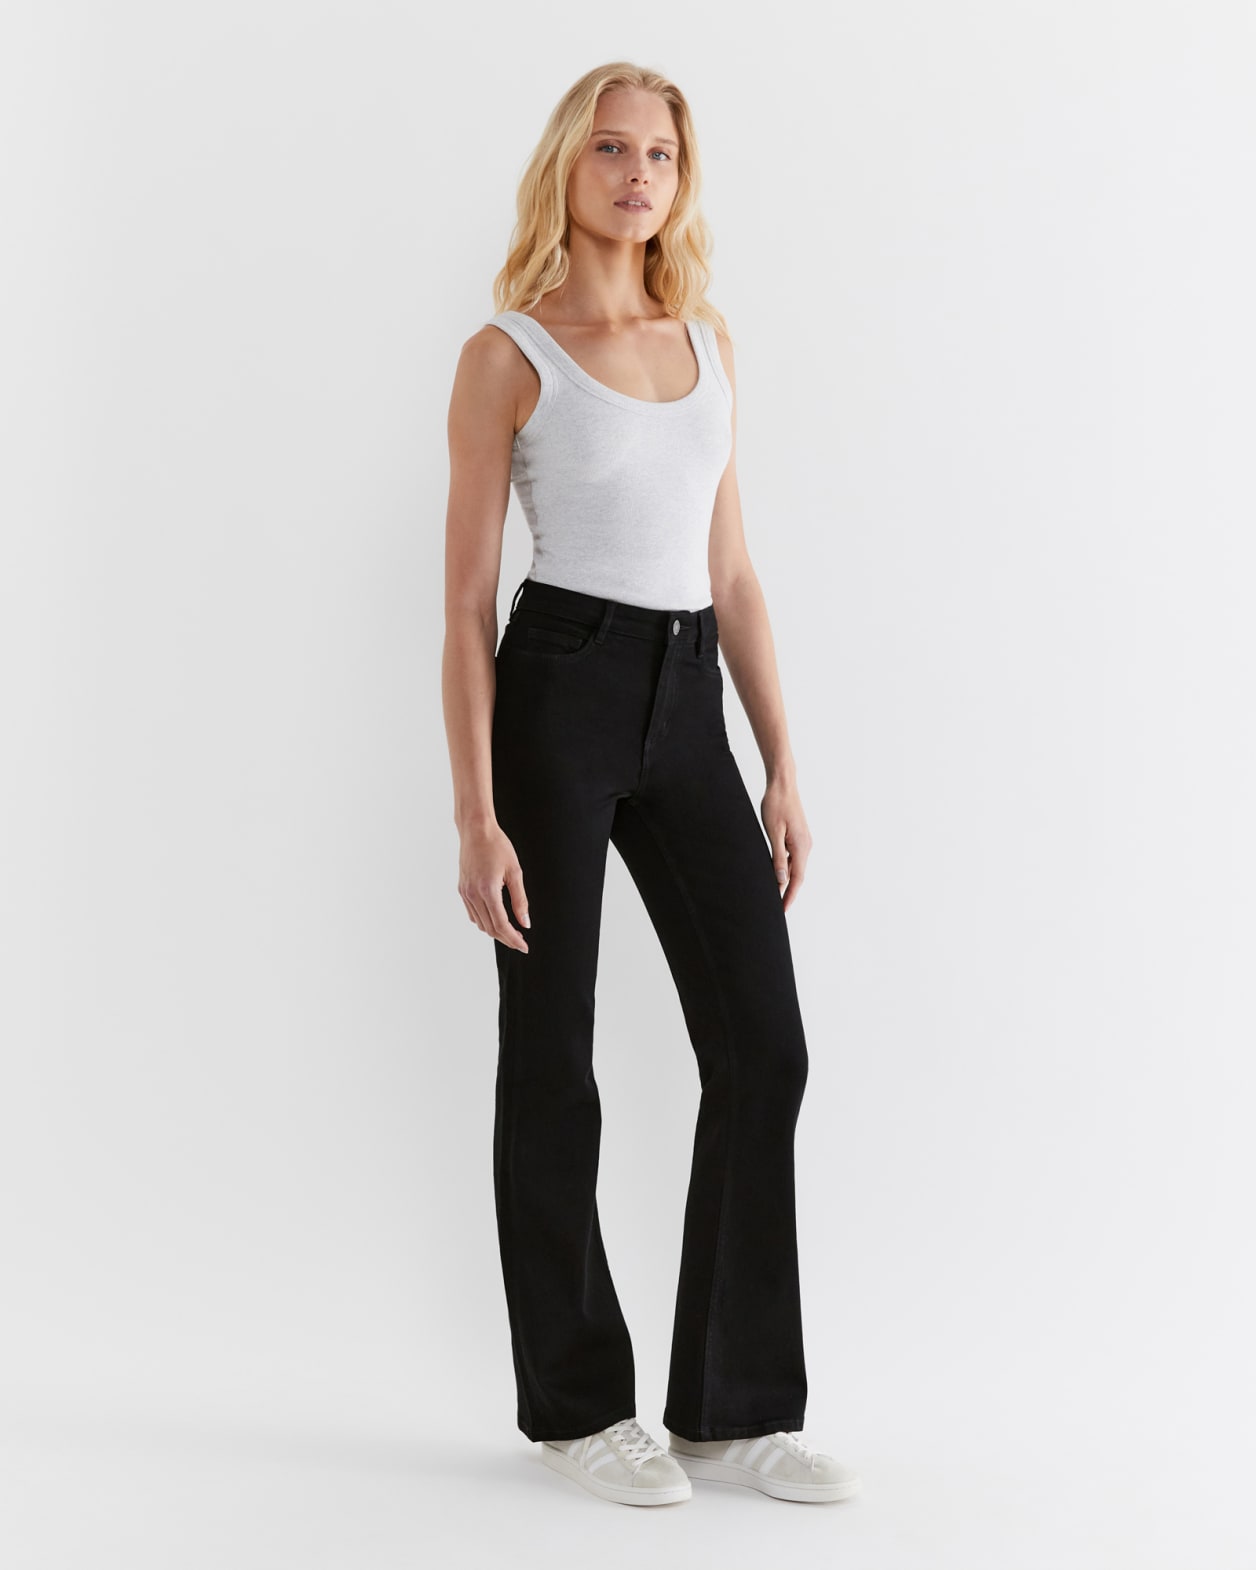 Bianca Mid Rise Bootleg Jeans in BLACK